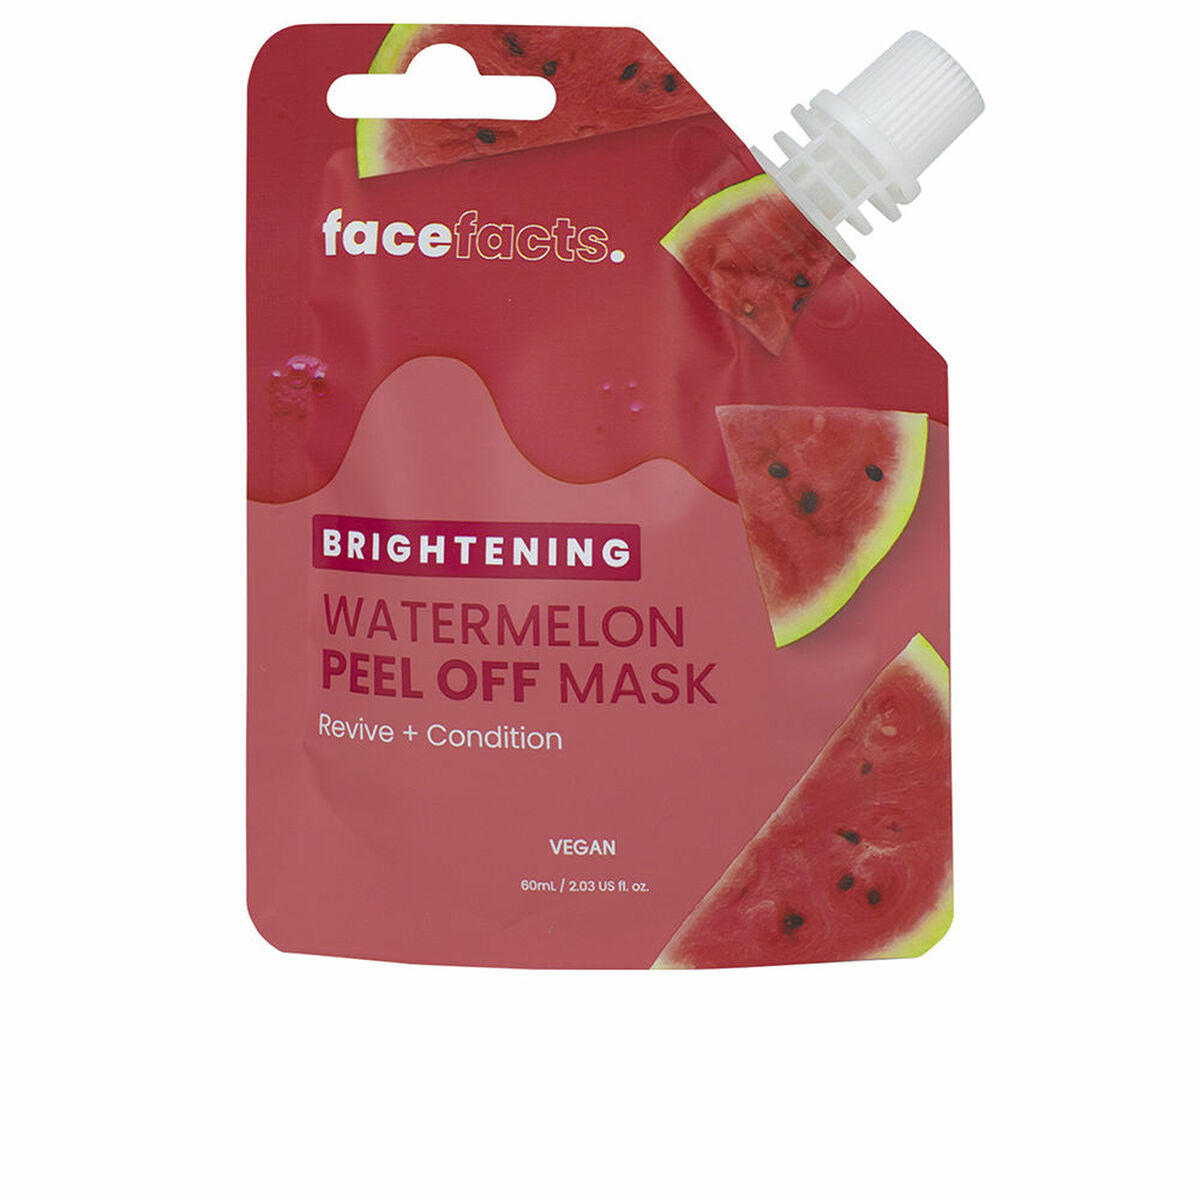 Facial Mask Peel Off Face Facts Brightening 60 ml-0